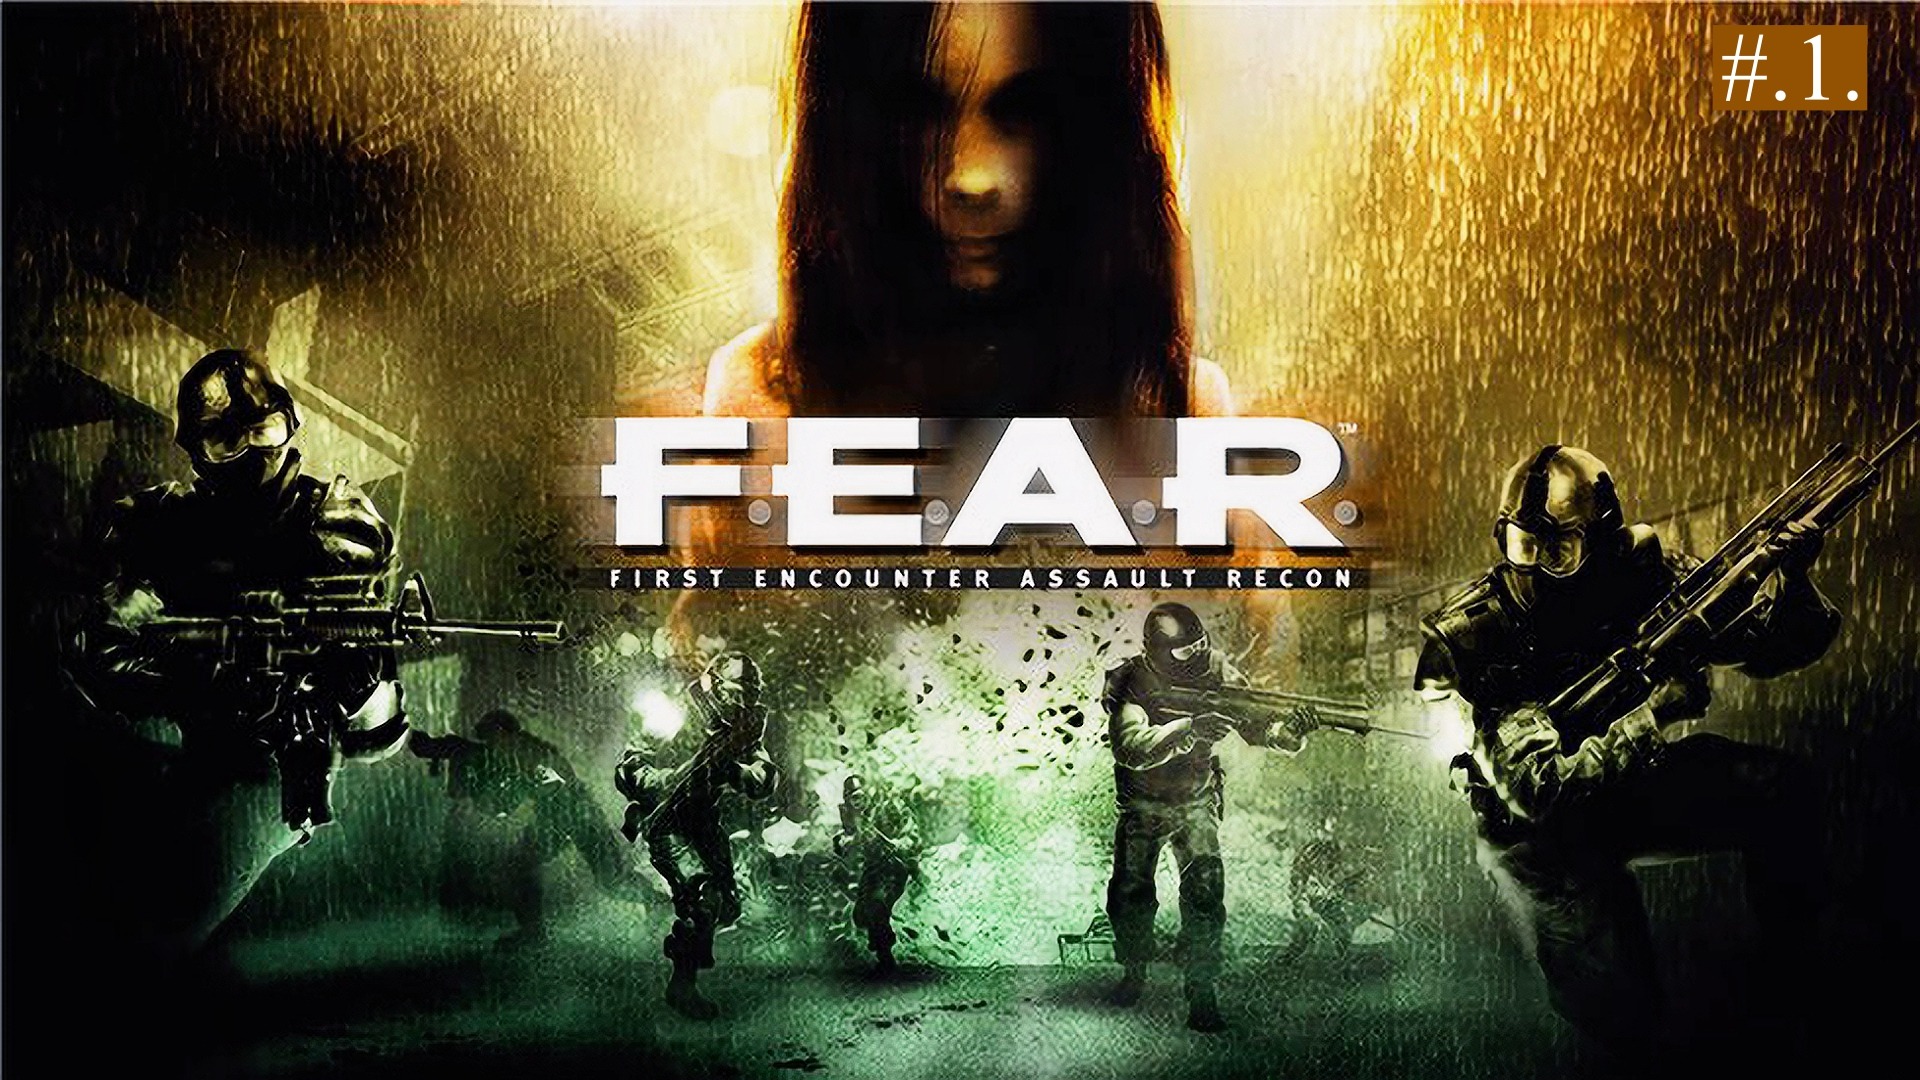 Extraction 1. Fear Extraction point Постер. Fear 1 обложка. F.E.A.R. 2005 обложка.